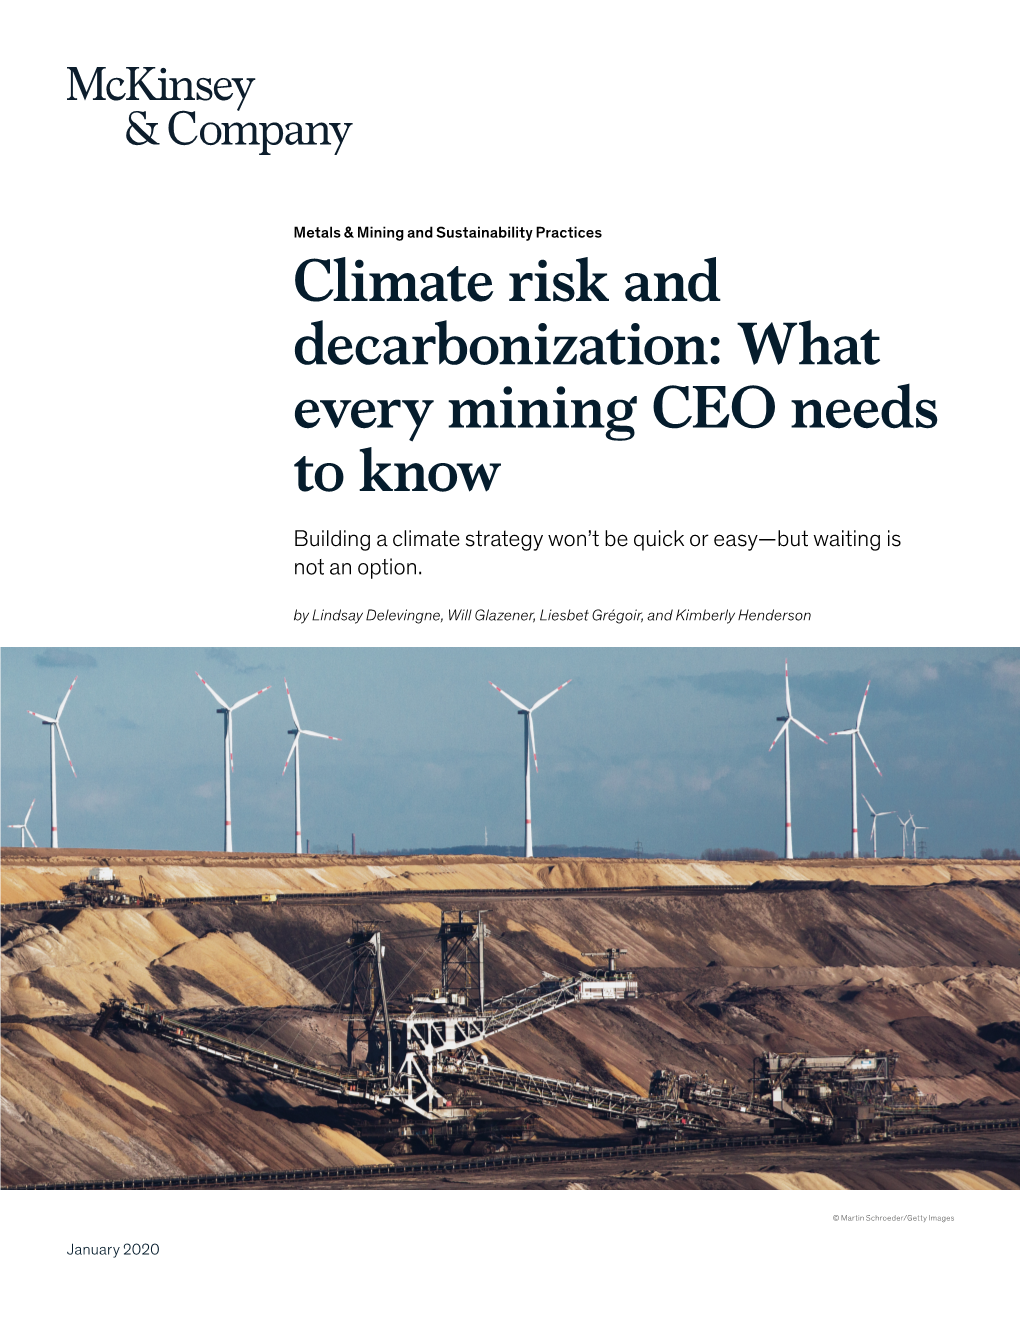 Climate Risk and Decarbonization: What Every Mining CEO Needs to Know Building a Climate Strategy Won’T Be Quick Or Easy—But Waiting Is Not an Option